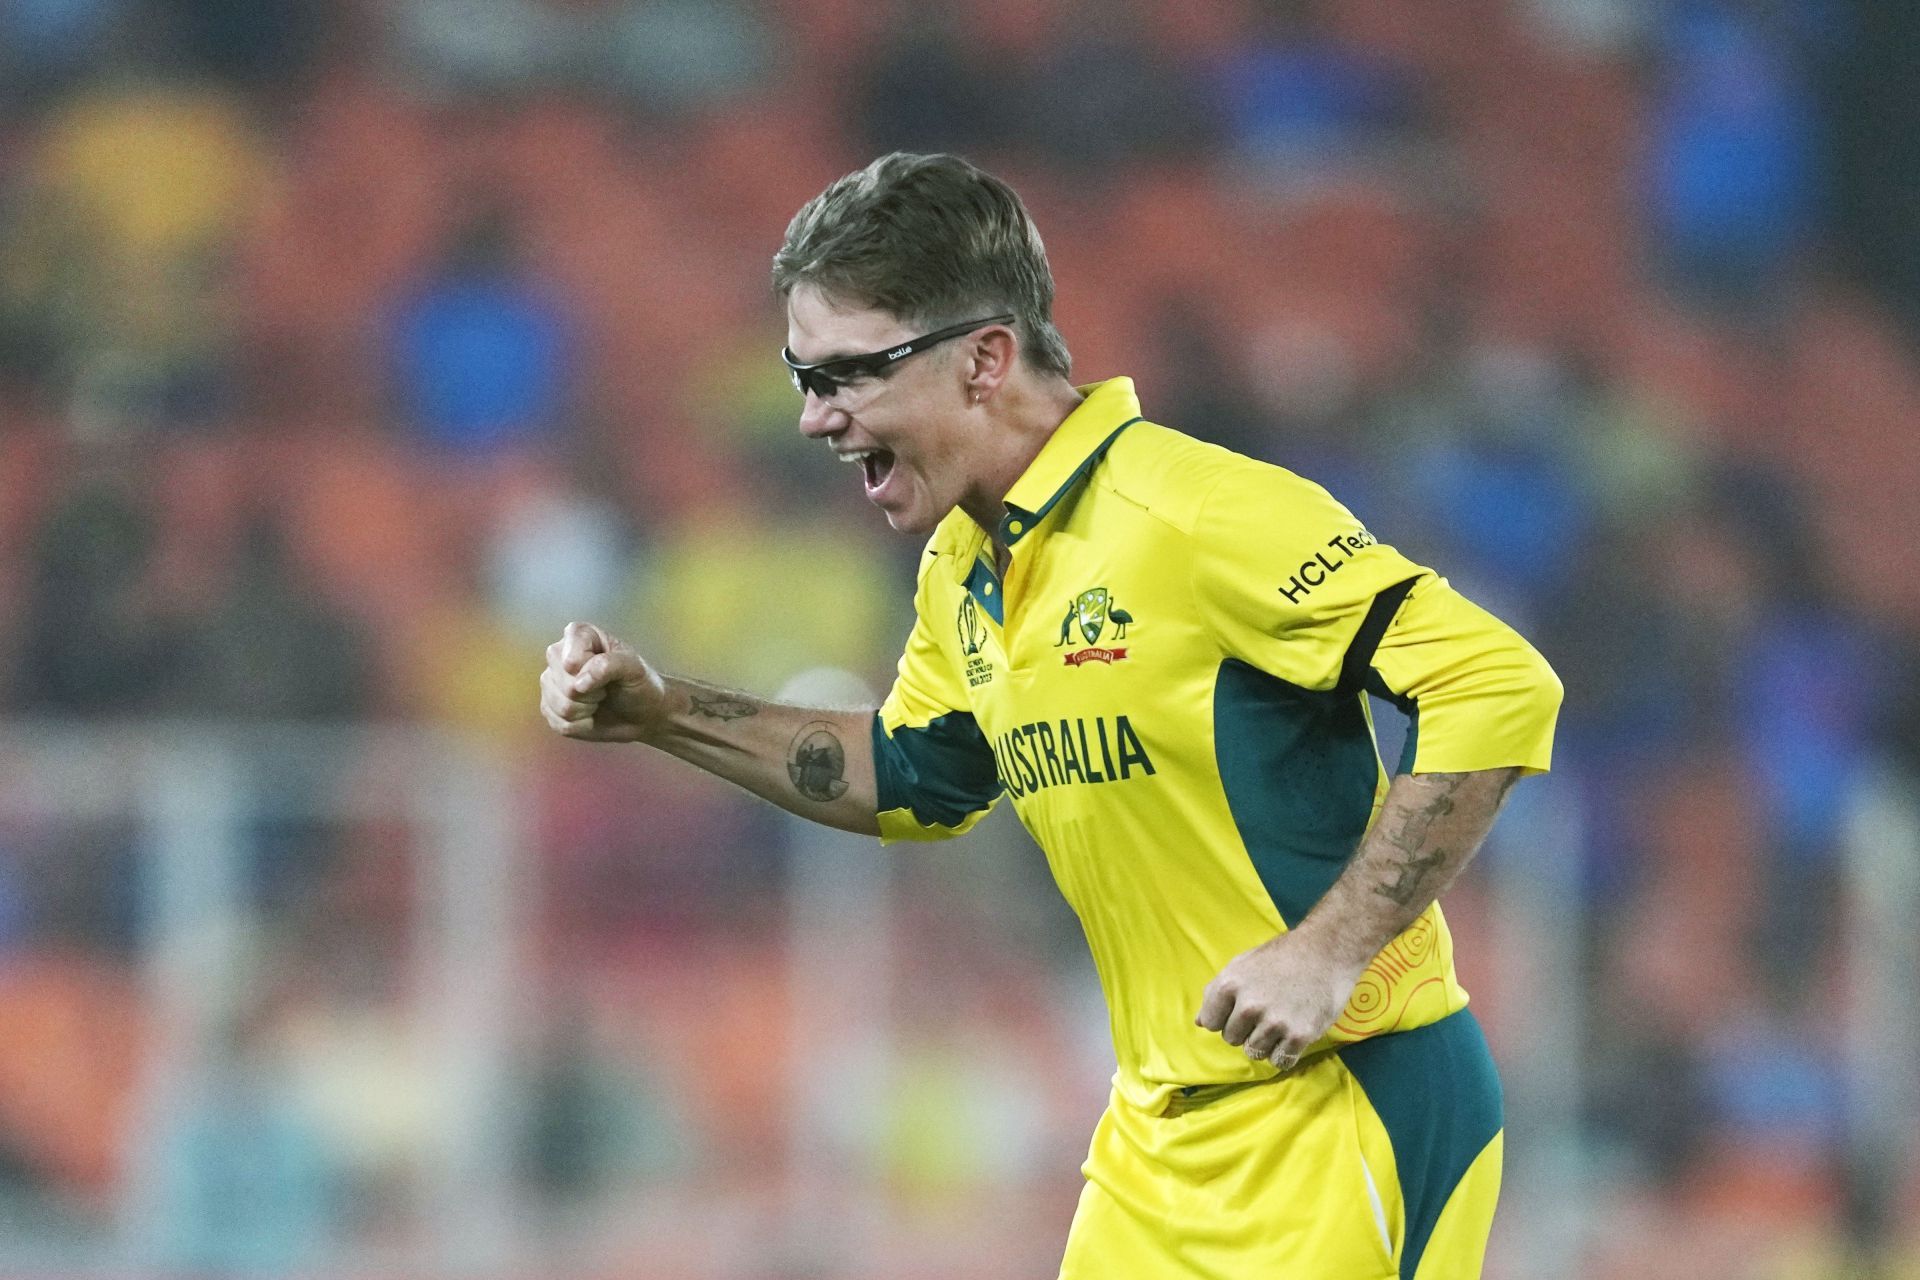 Adam Zampa is the highest wicket-taker in the 2023 World Cup